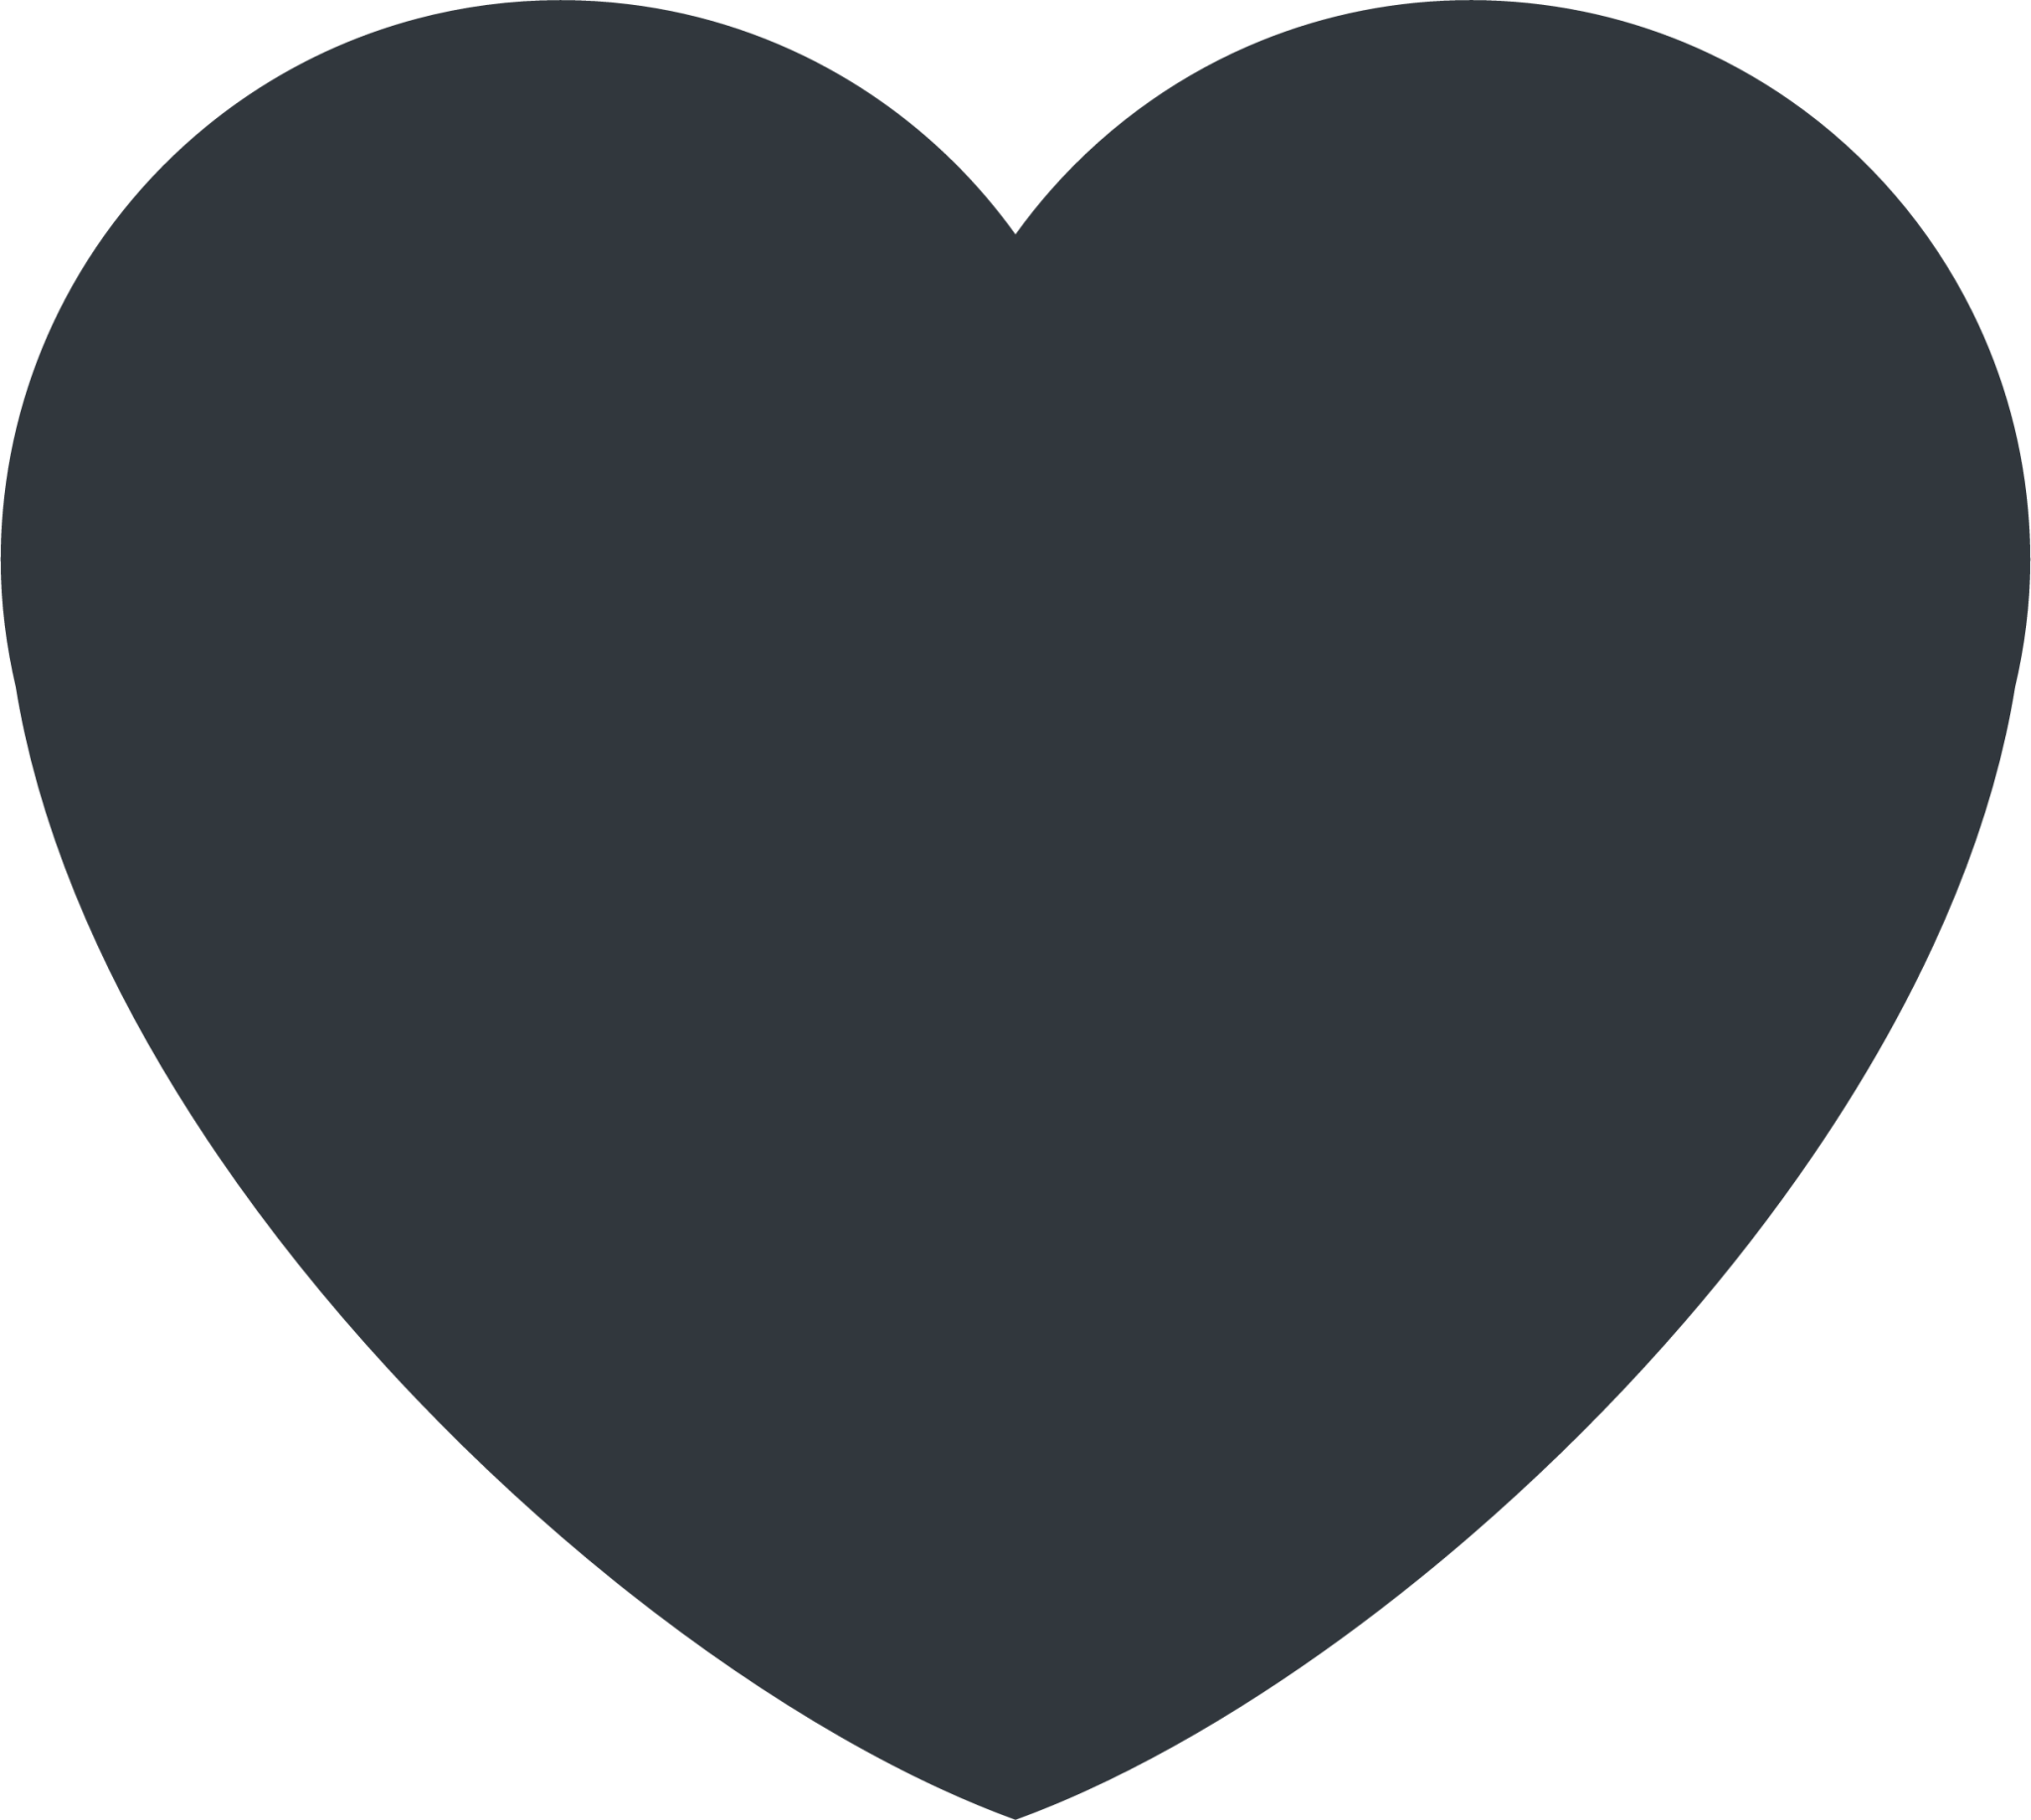 Black Heart PNG Free Image